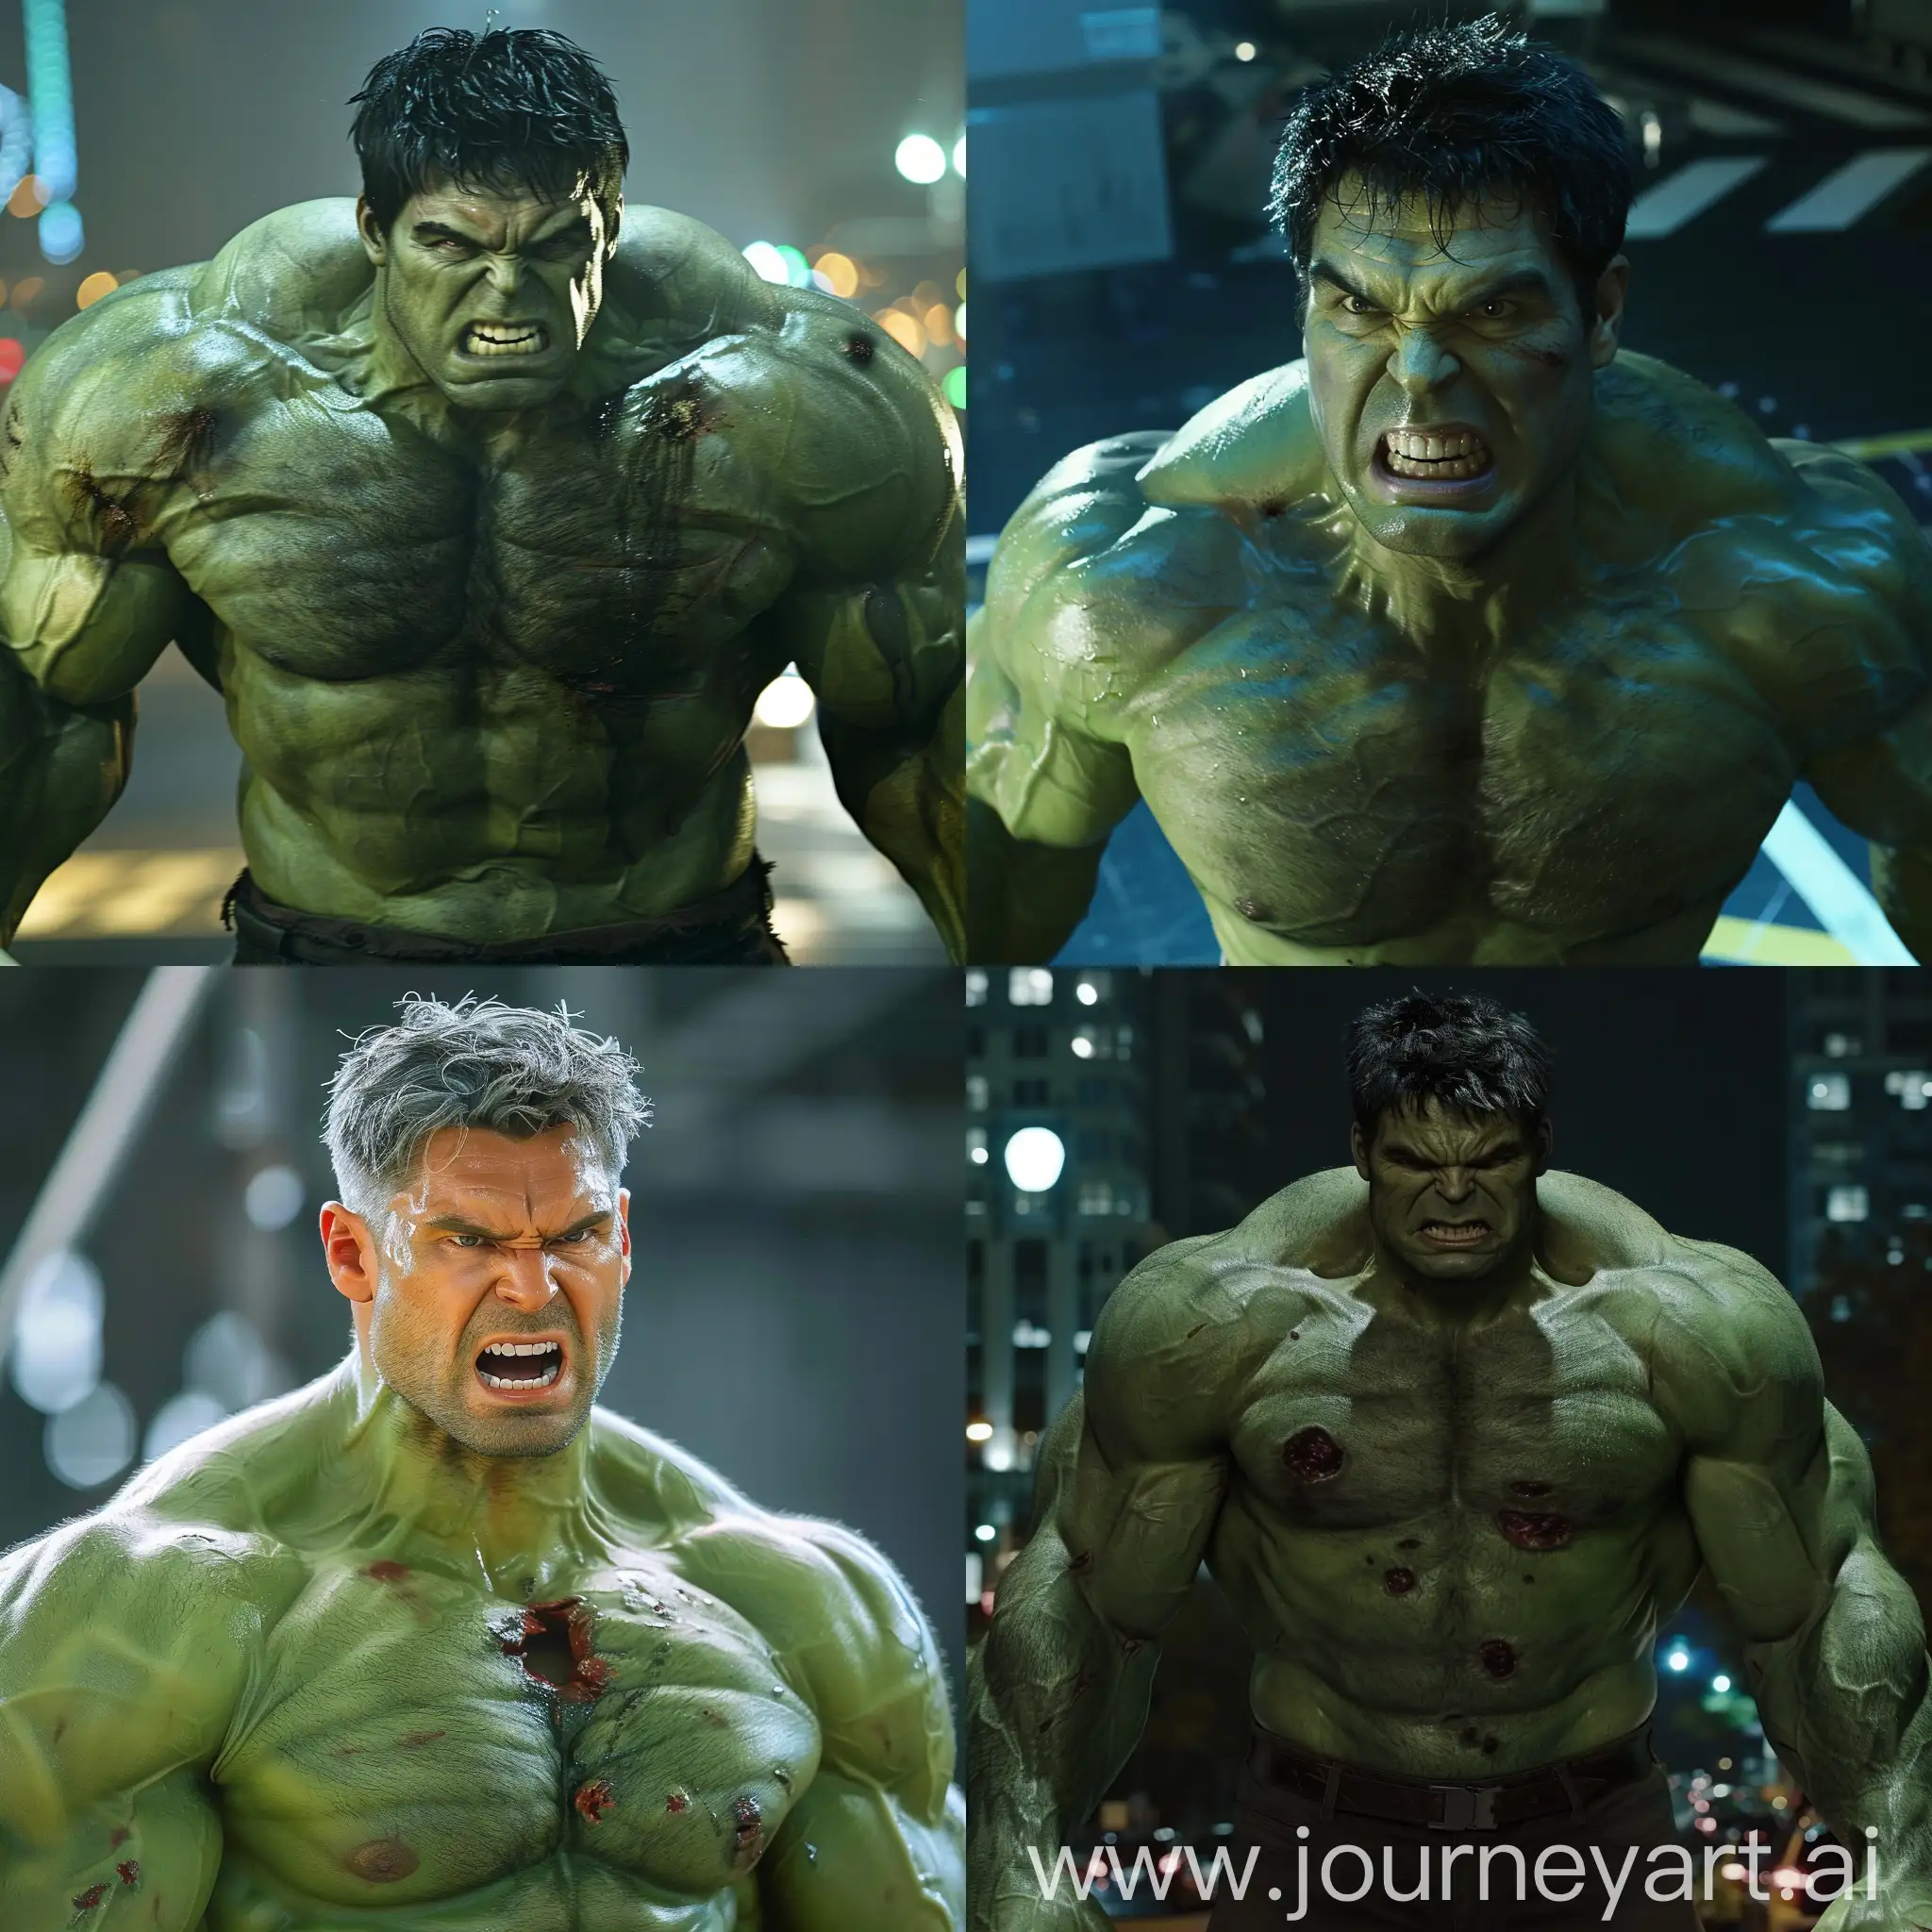 Muscular-Hero-The-Hulk-as-portrayed-by-Actor-Eric-Bana-in-a-11-Aspect-Ratio